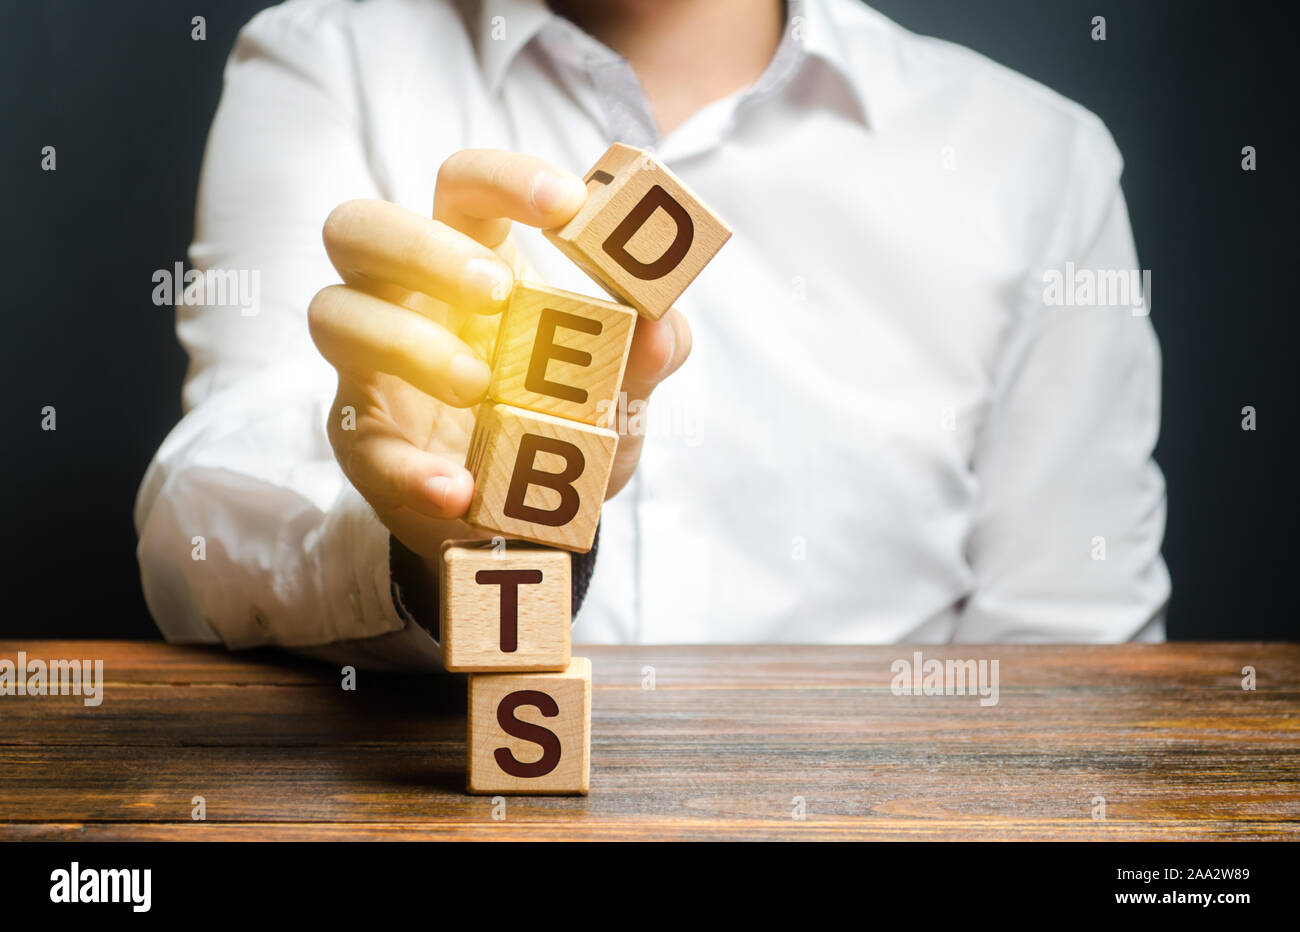 A man breaks a tower of blocks with the word Debts. Reduction or restructuring of debt. Bankruptcy. Refusal to pay. Heavily indebted citizens low fina Stock Photo